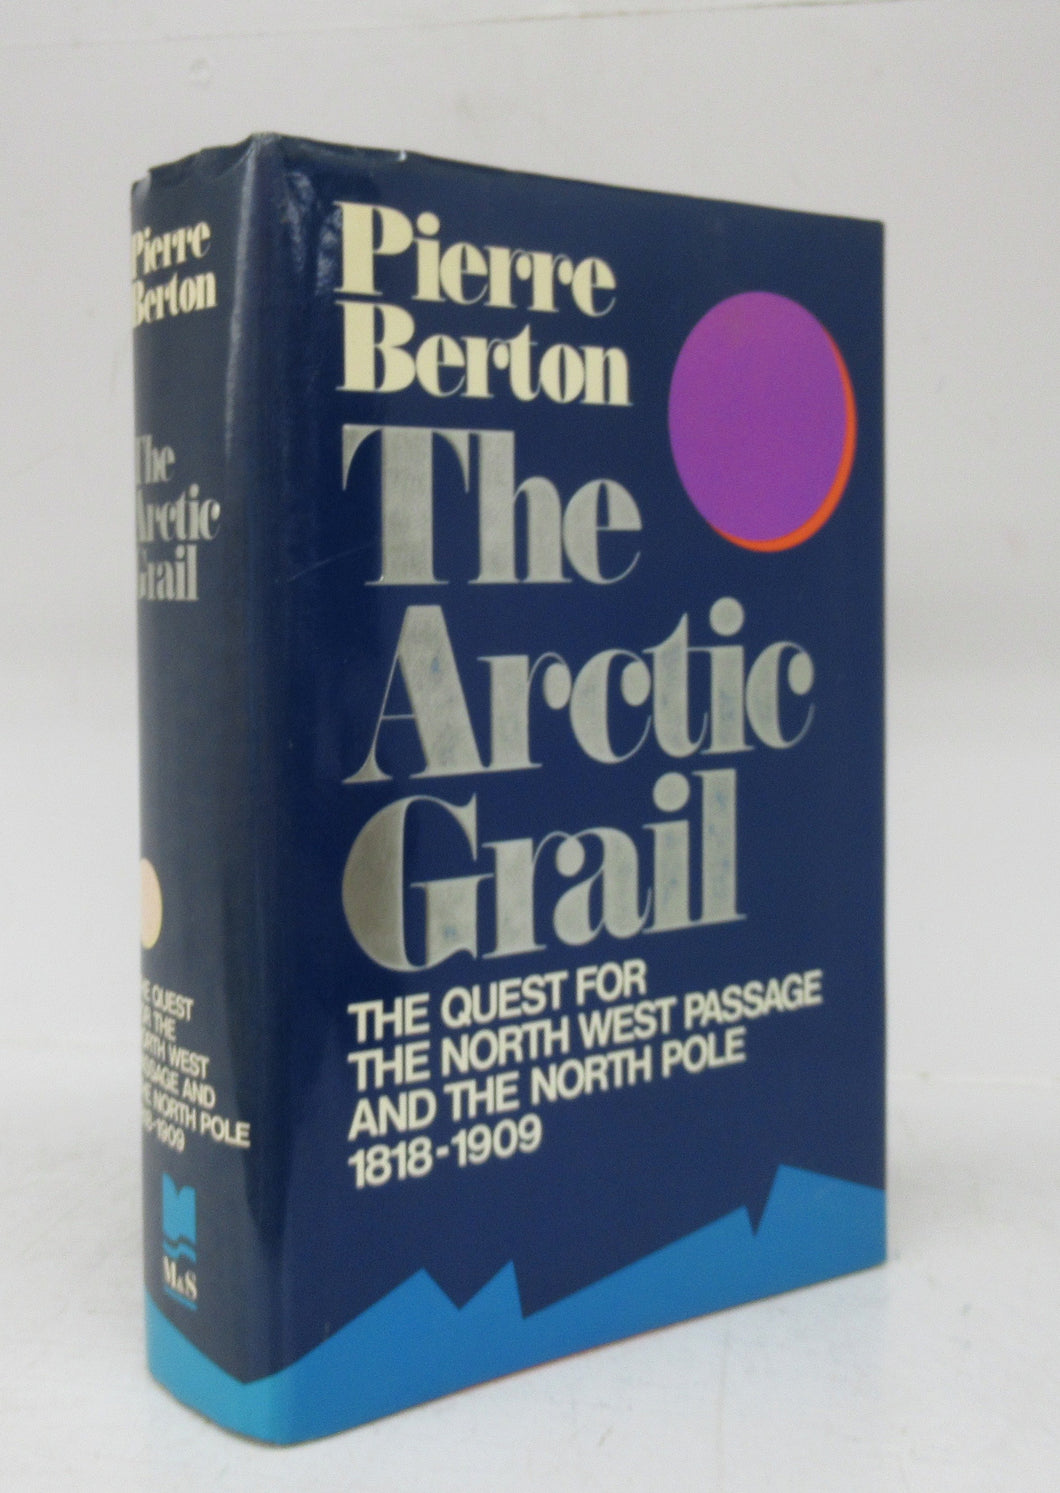 The Arctic Grail: The Quest for the North West Passage and the North Pole 1818-1909